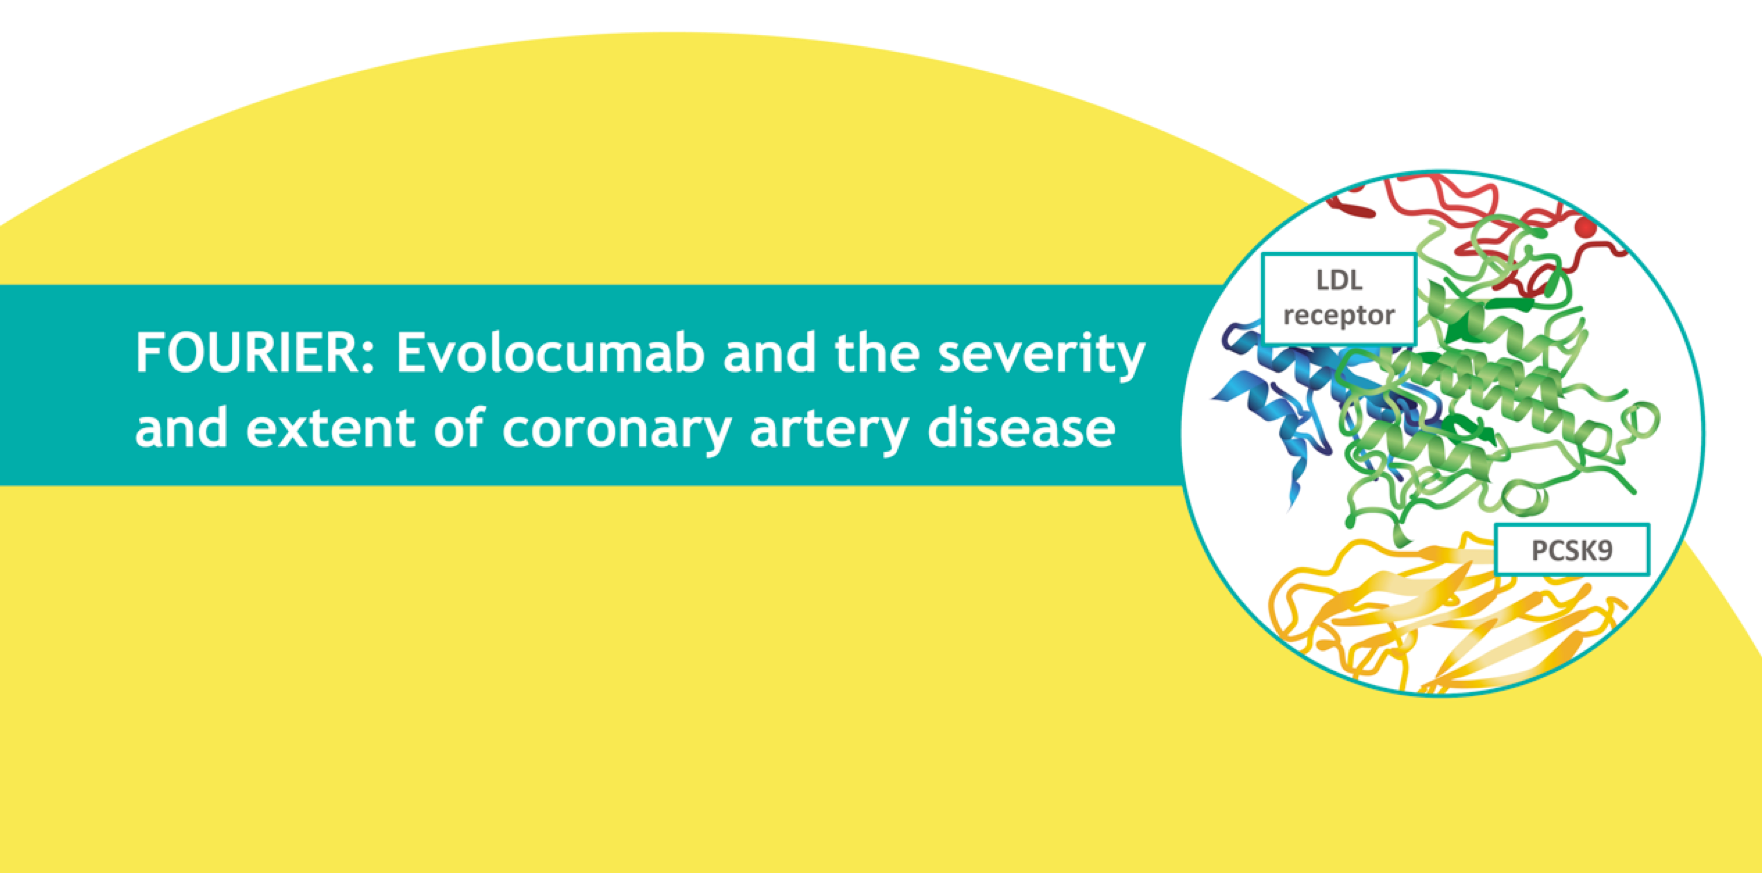 Fourier: Evolocumab and the severity and extent of coronary artery disease